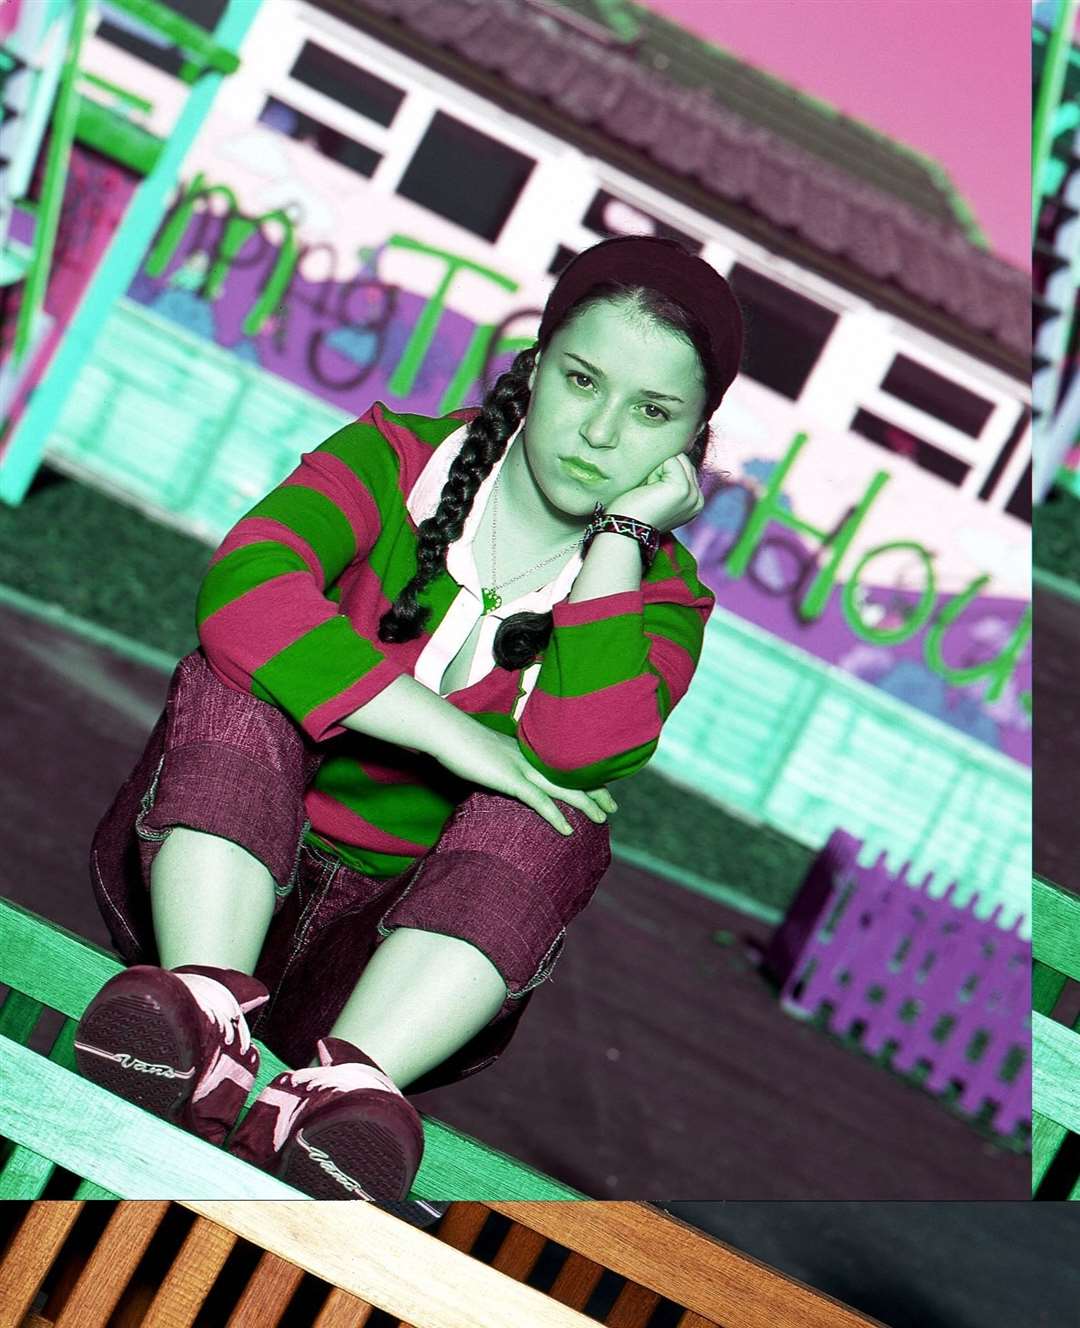 Dani is best known for playing tracy beaker.